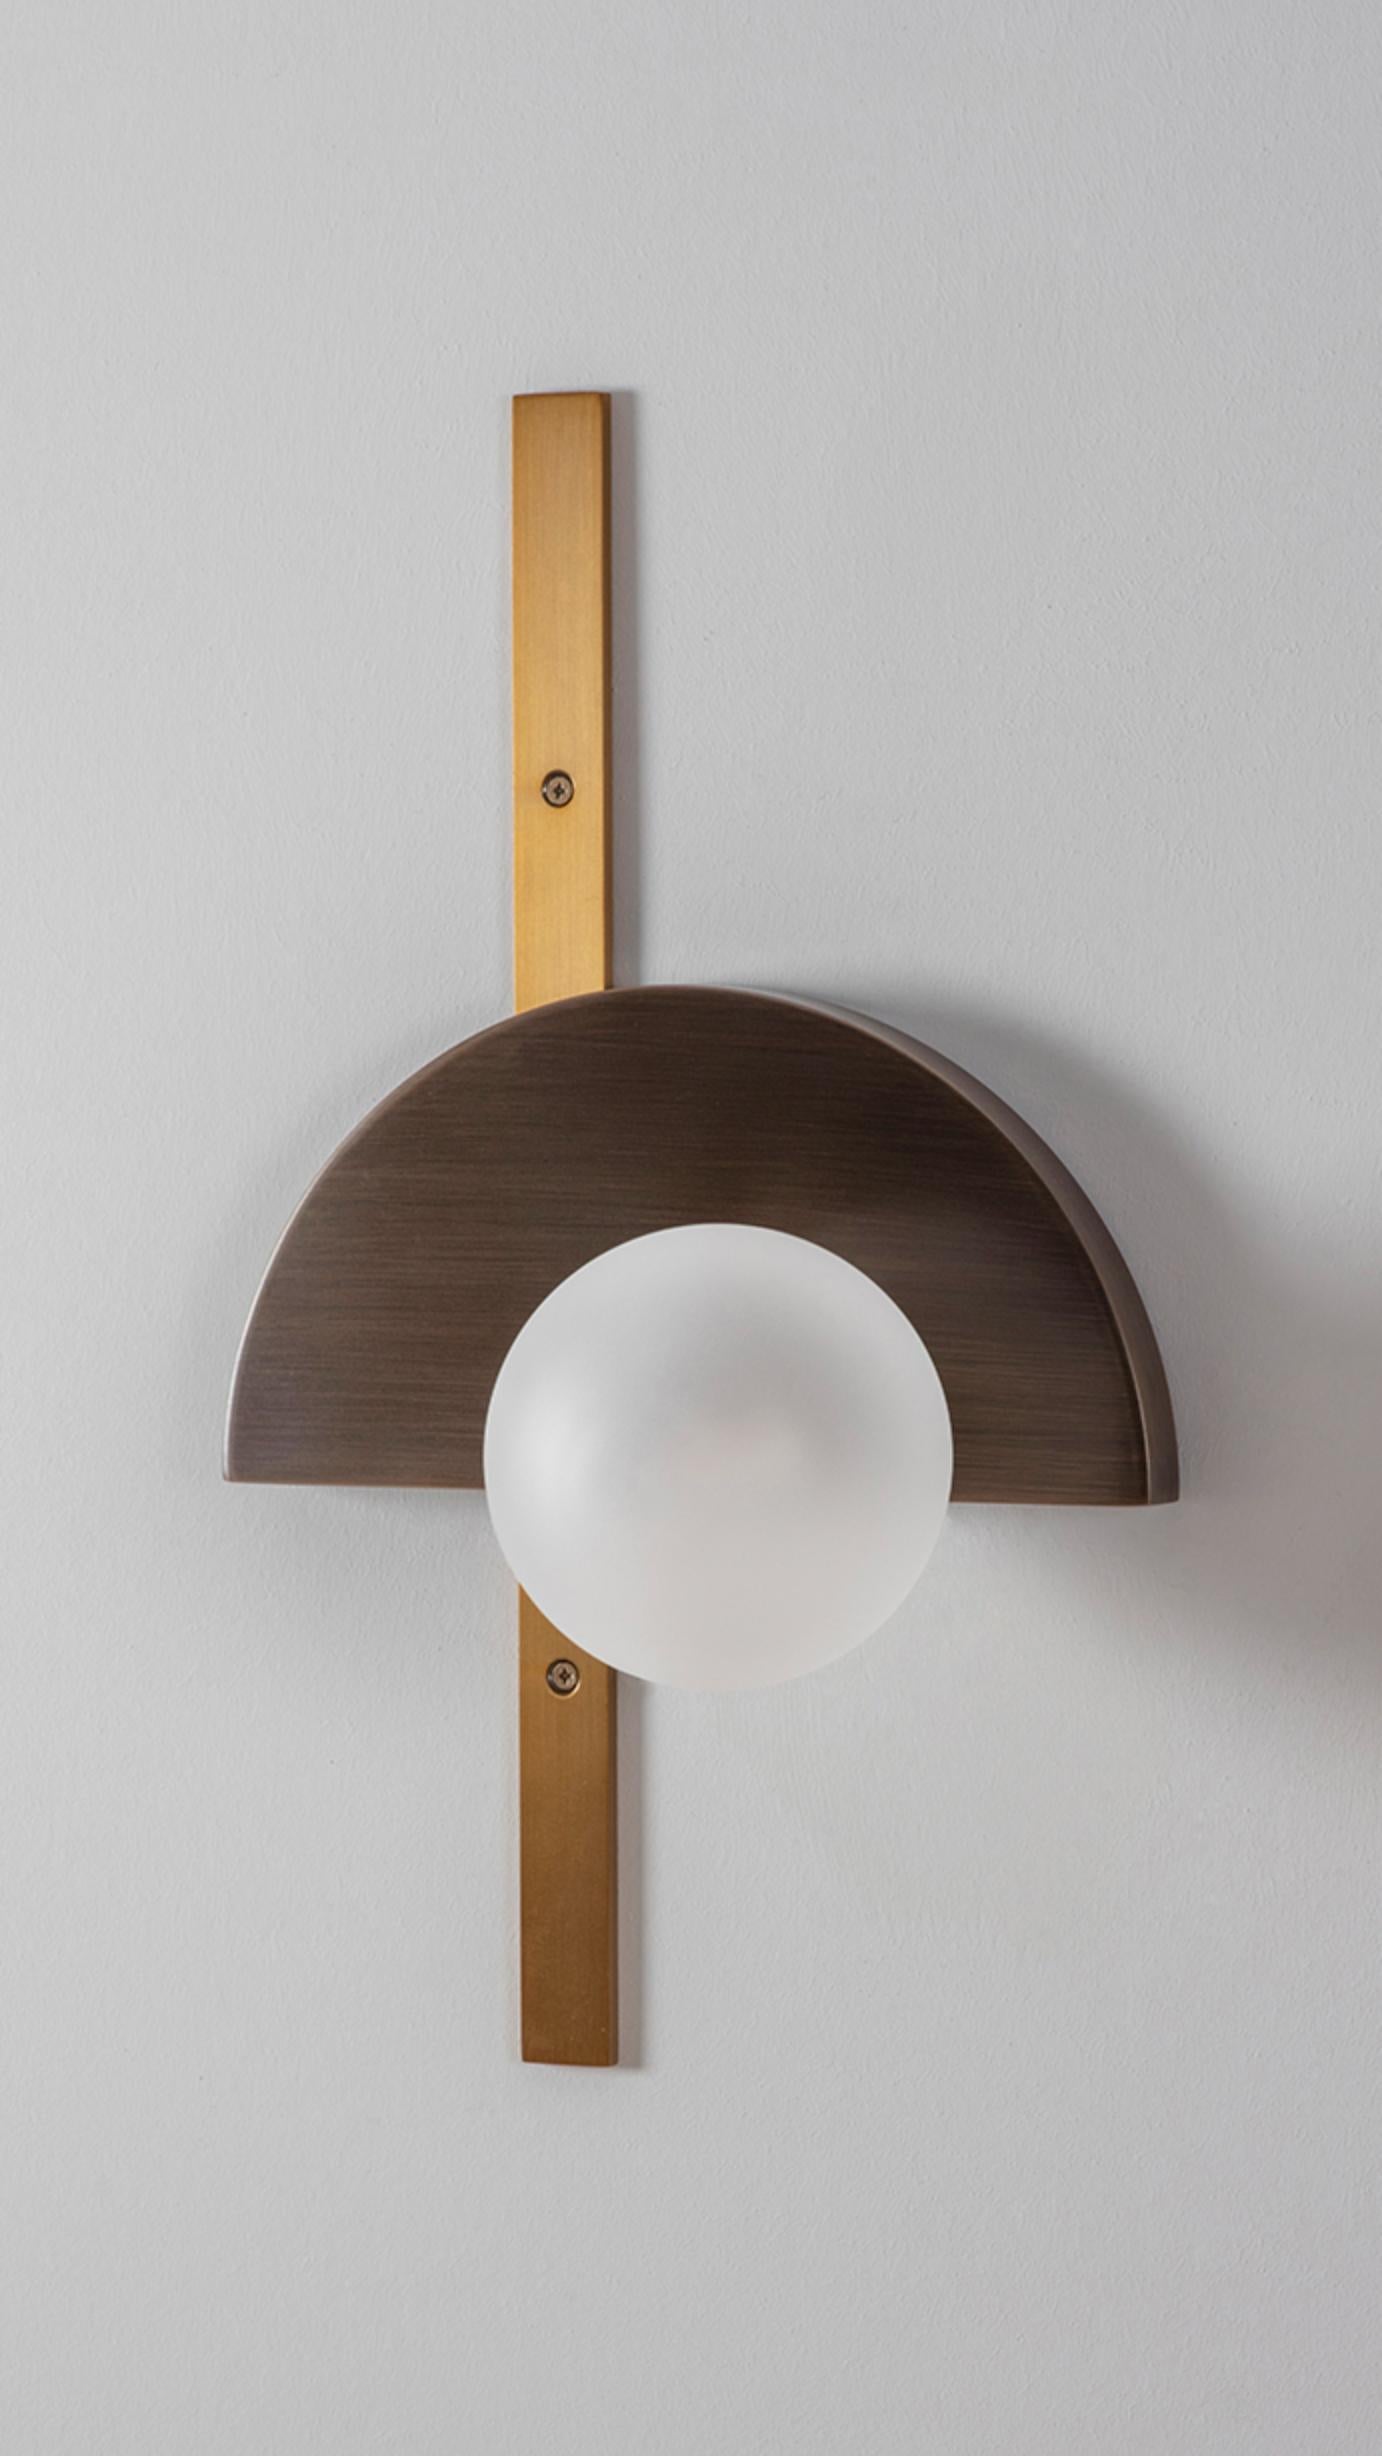 Set of 2 Brass Exhibition Wall Lights by Square in Circle
Dimensions: W 25 x H 41.5 x D 15 cm
Materials: Brushed brass finish, antique bronze, white frosted glass globe

The inspiration for this concept came from observing Joost Schmidt's Bauhaus